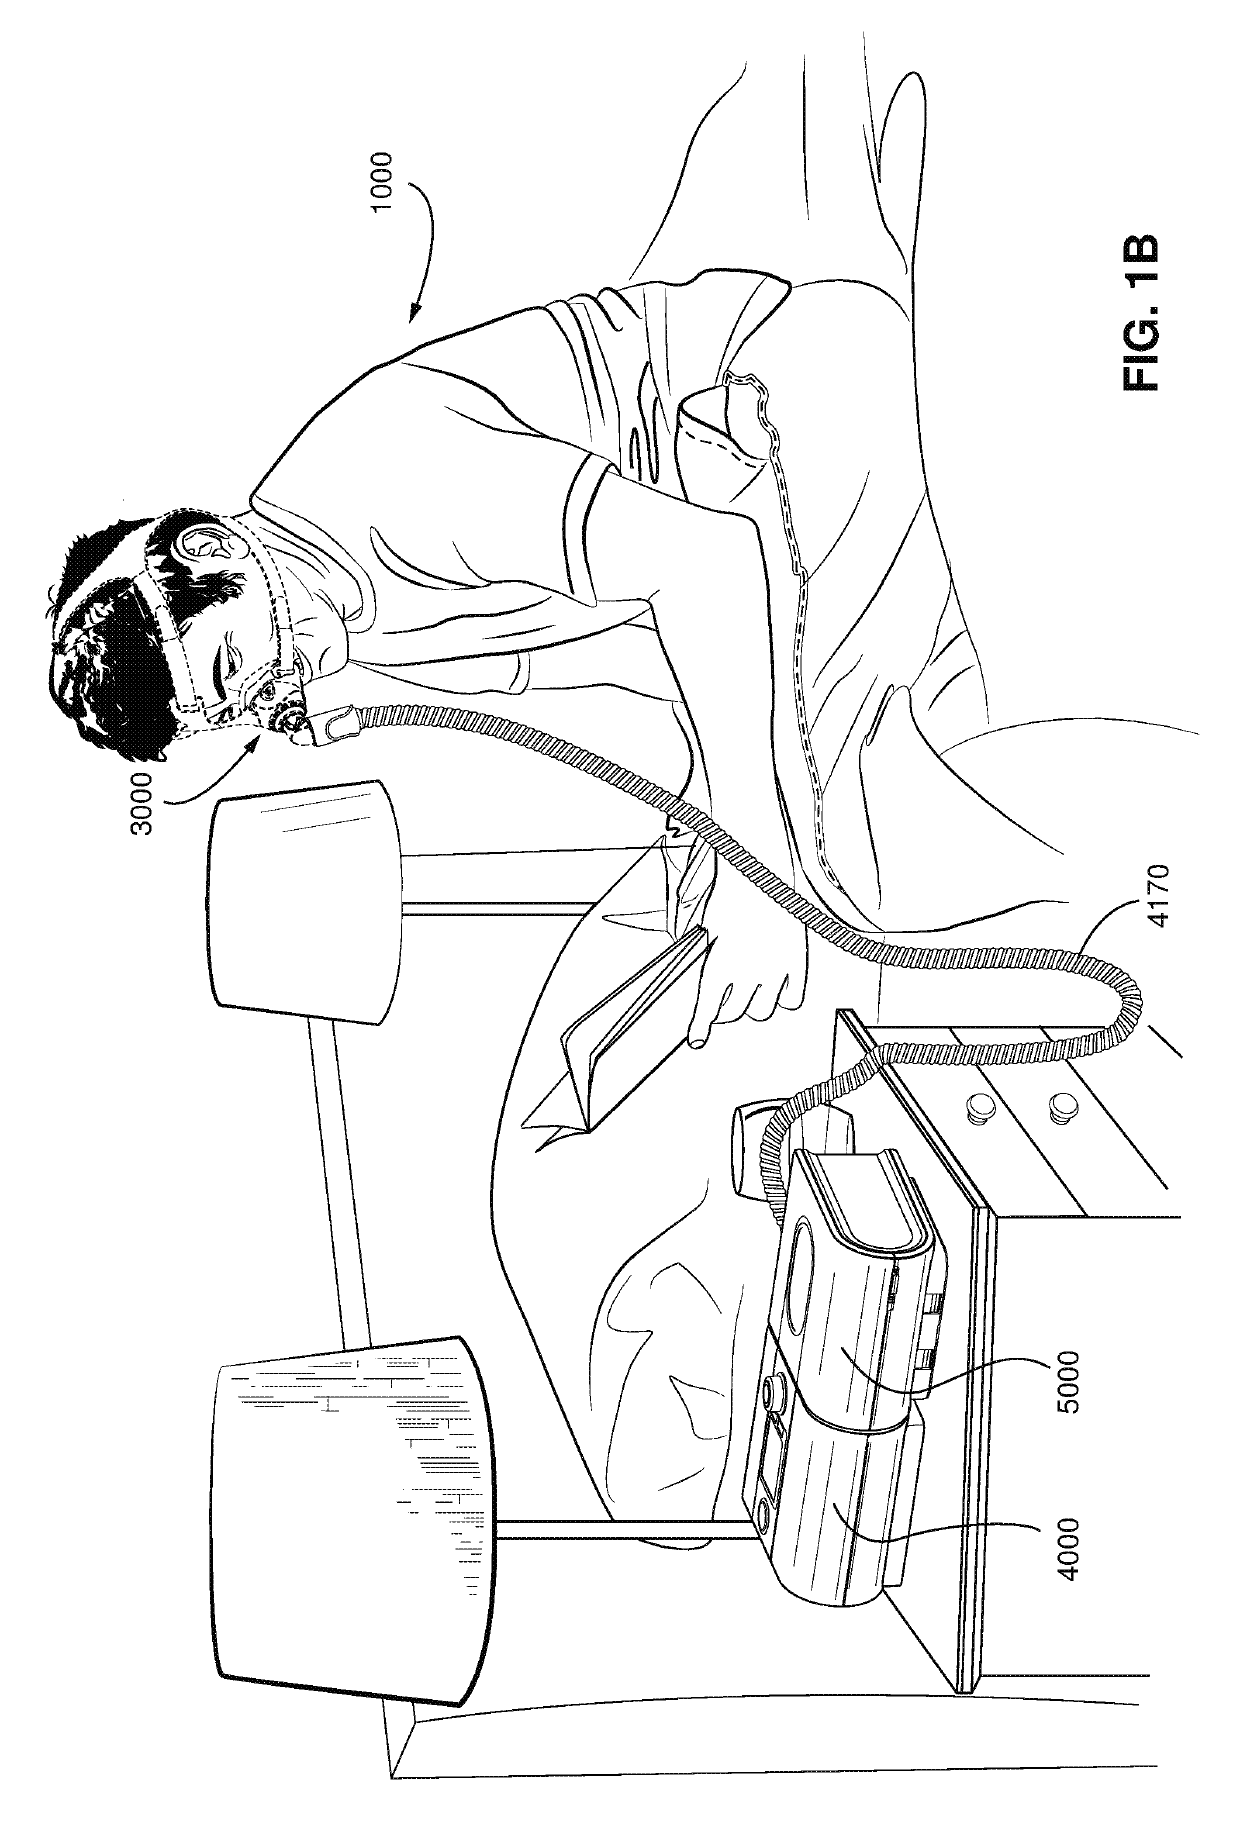 Patient interface with movable frame